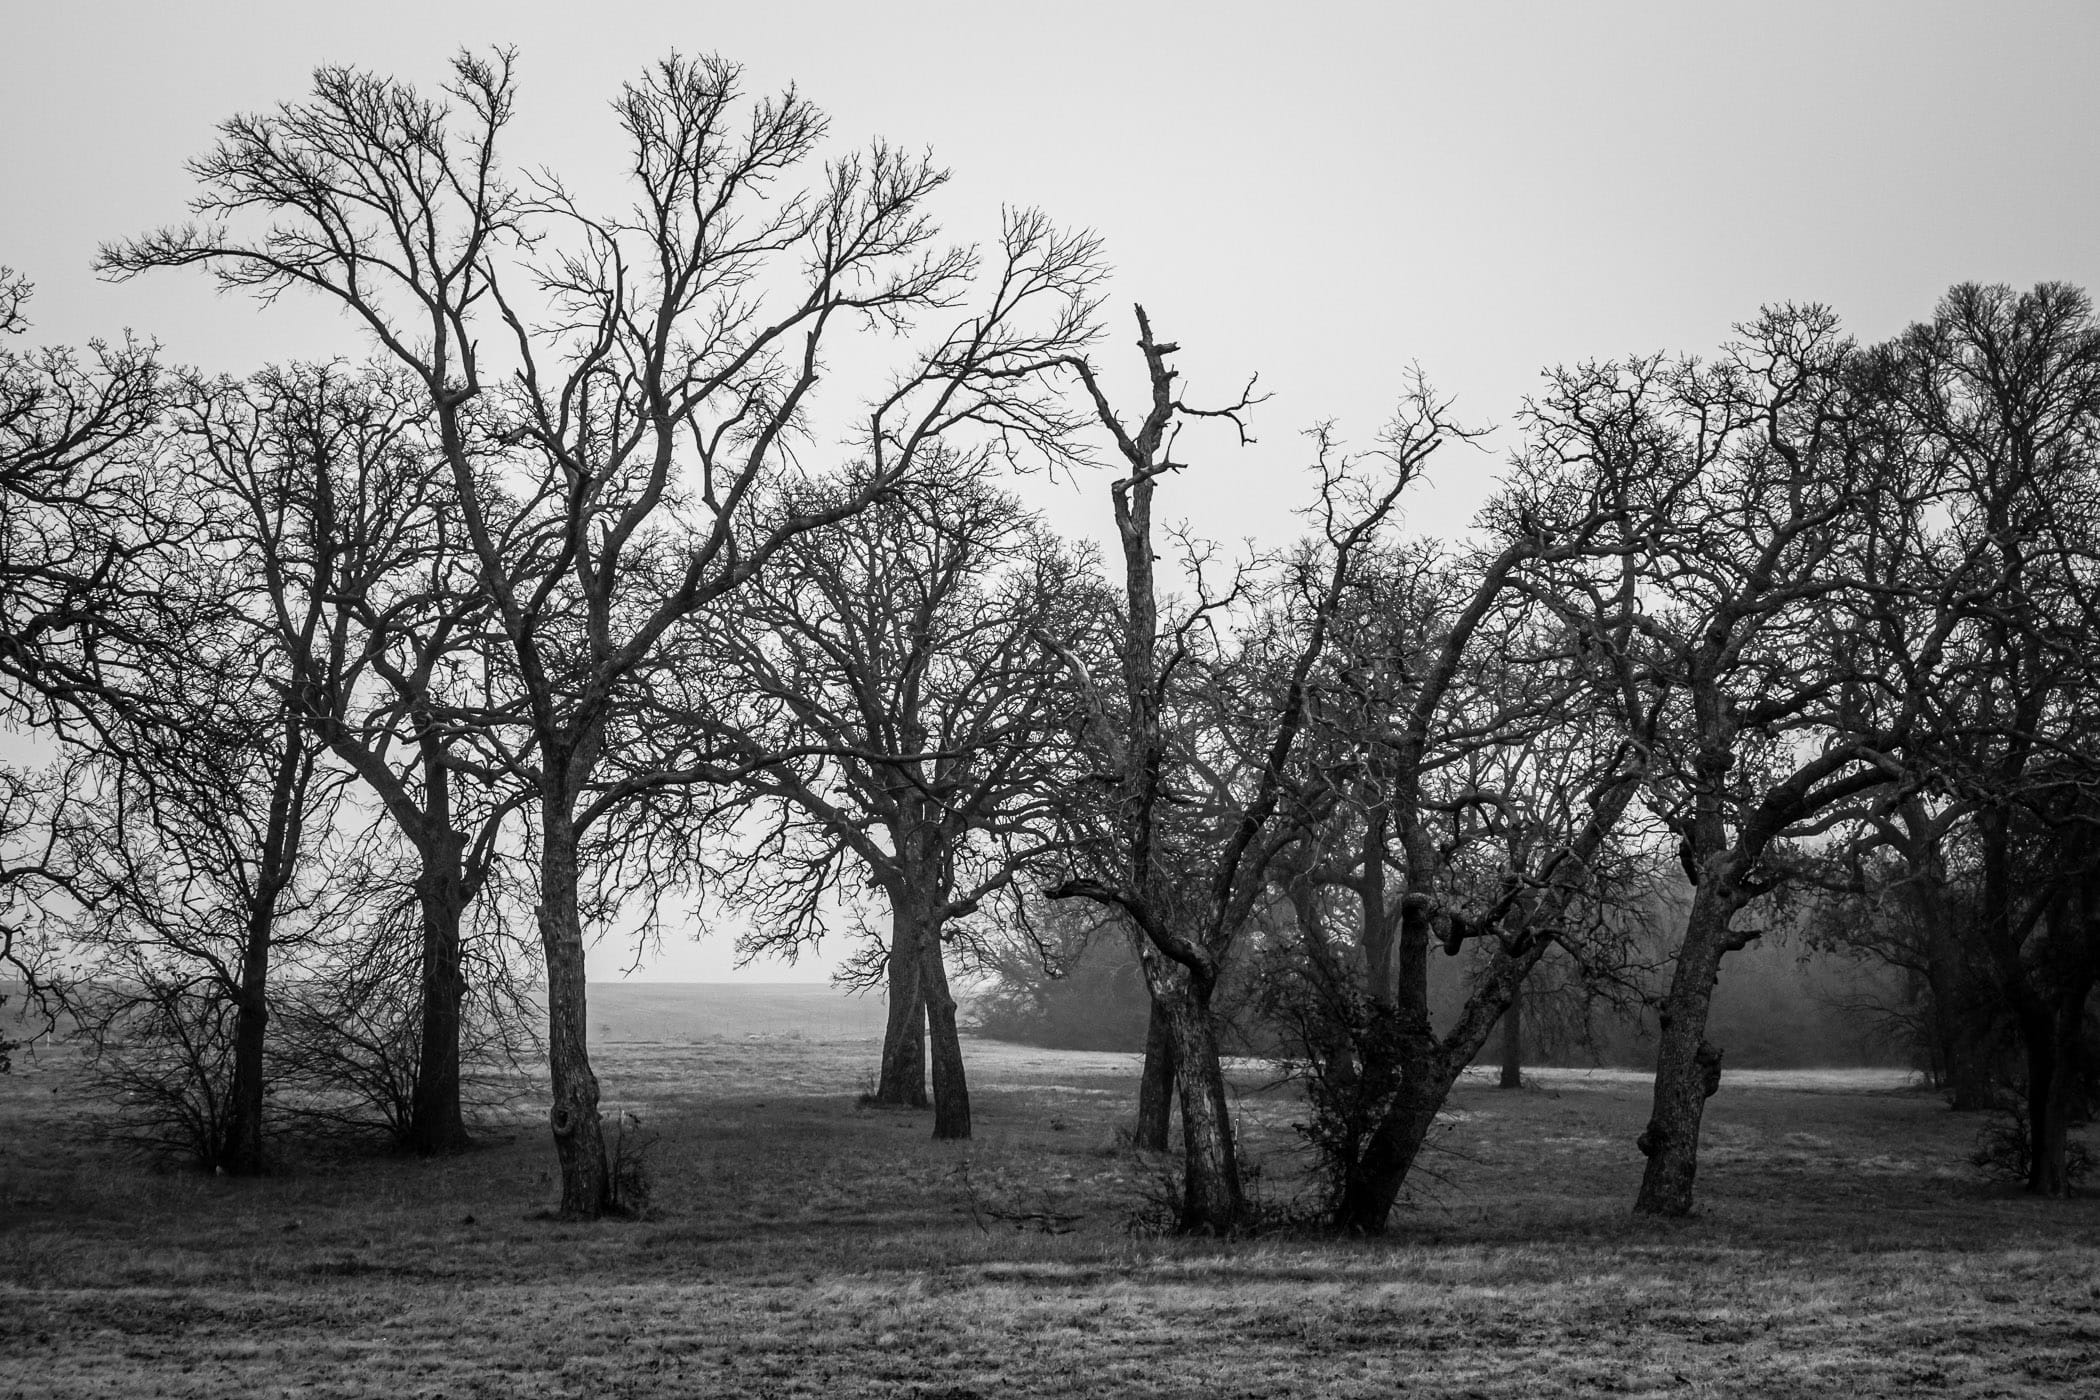 Stark, leafless trees spotted on the grounds of DFW International Airport, Texas.